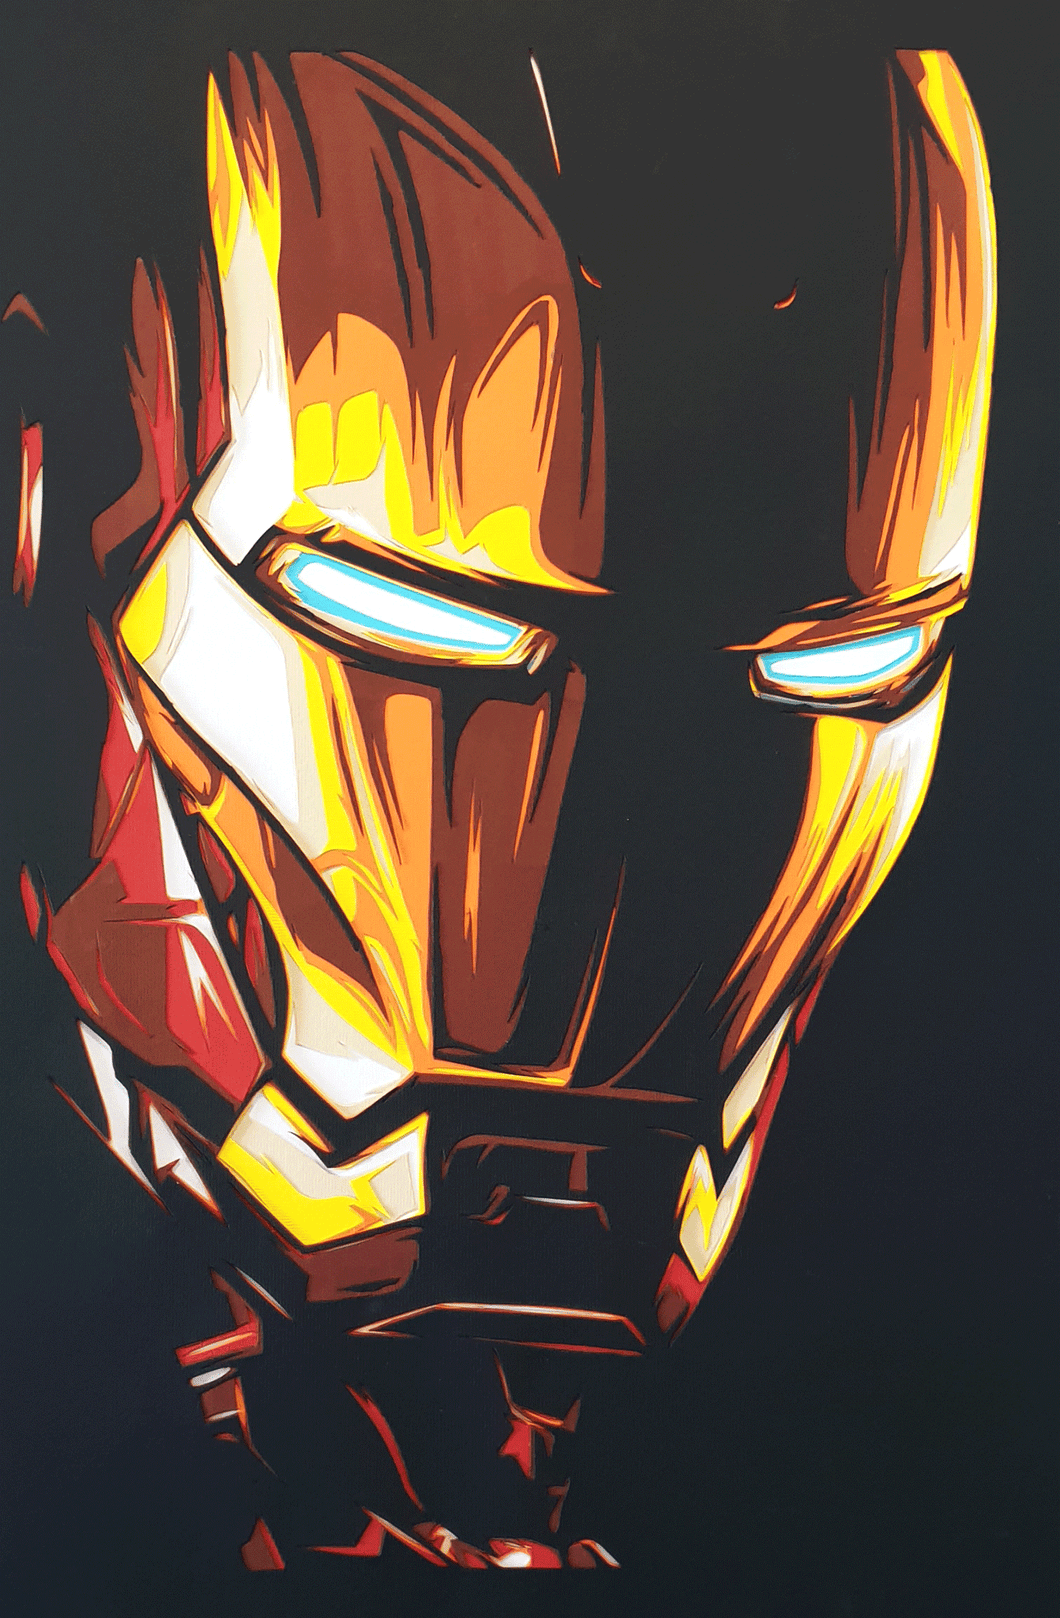 Iron Man by Rick Sharif - FRAMED  [A3 Size (297 x 420 mm) (11.7 x 16.5 in) in a FRAME]